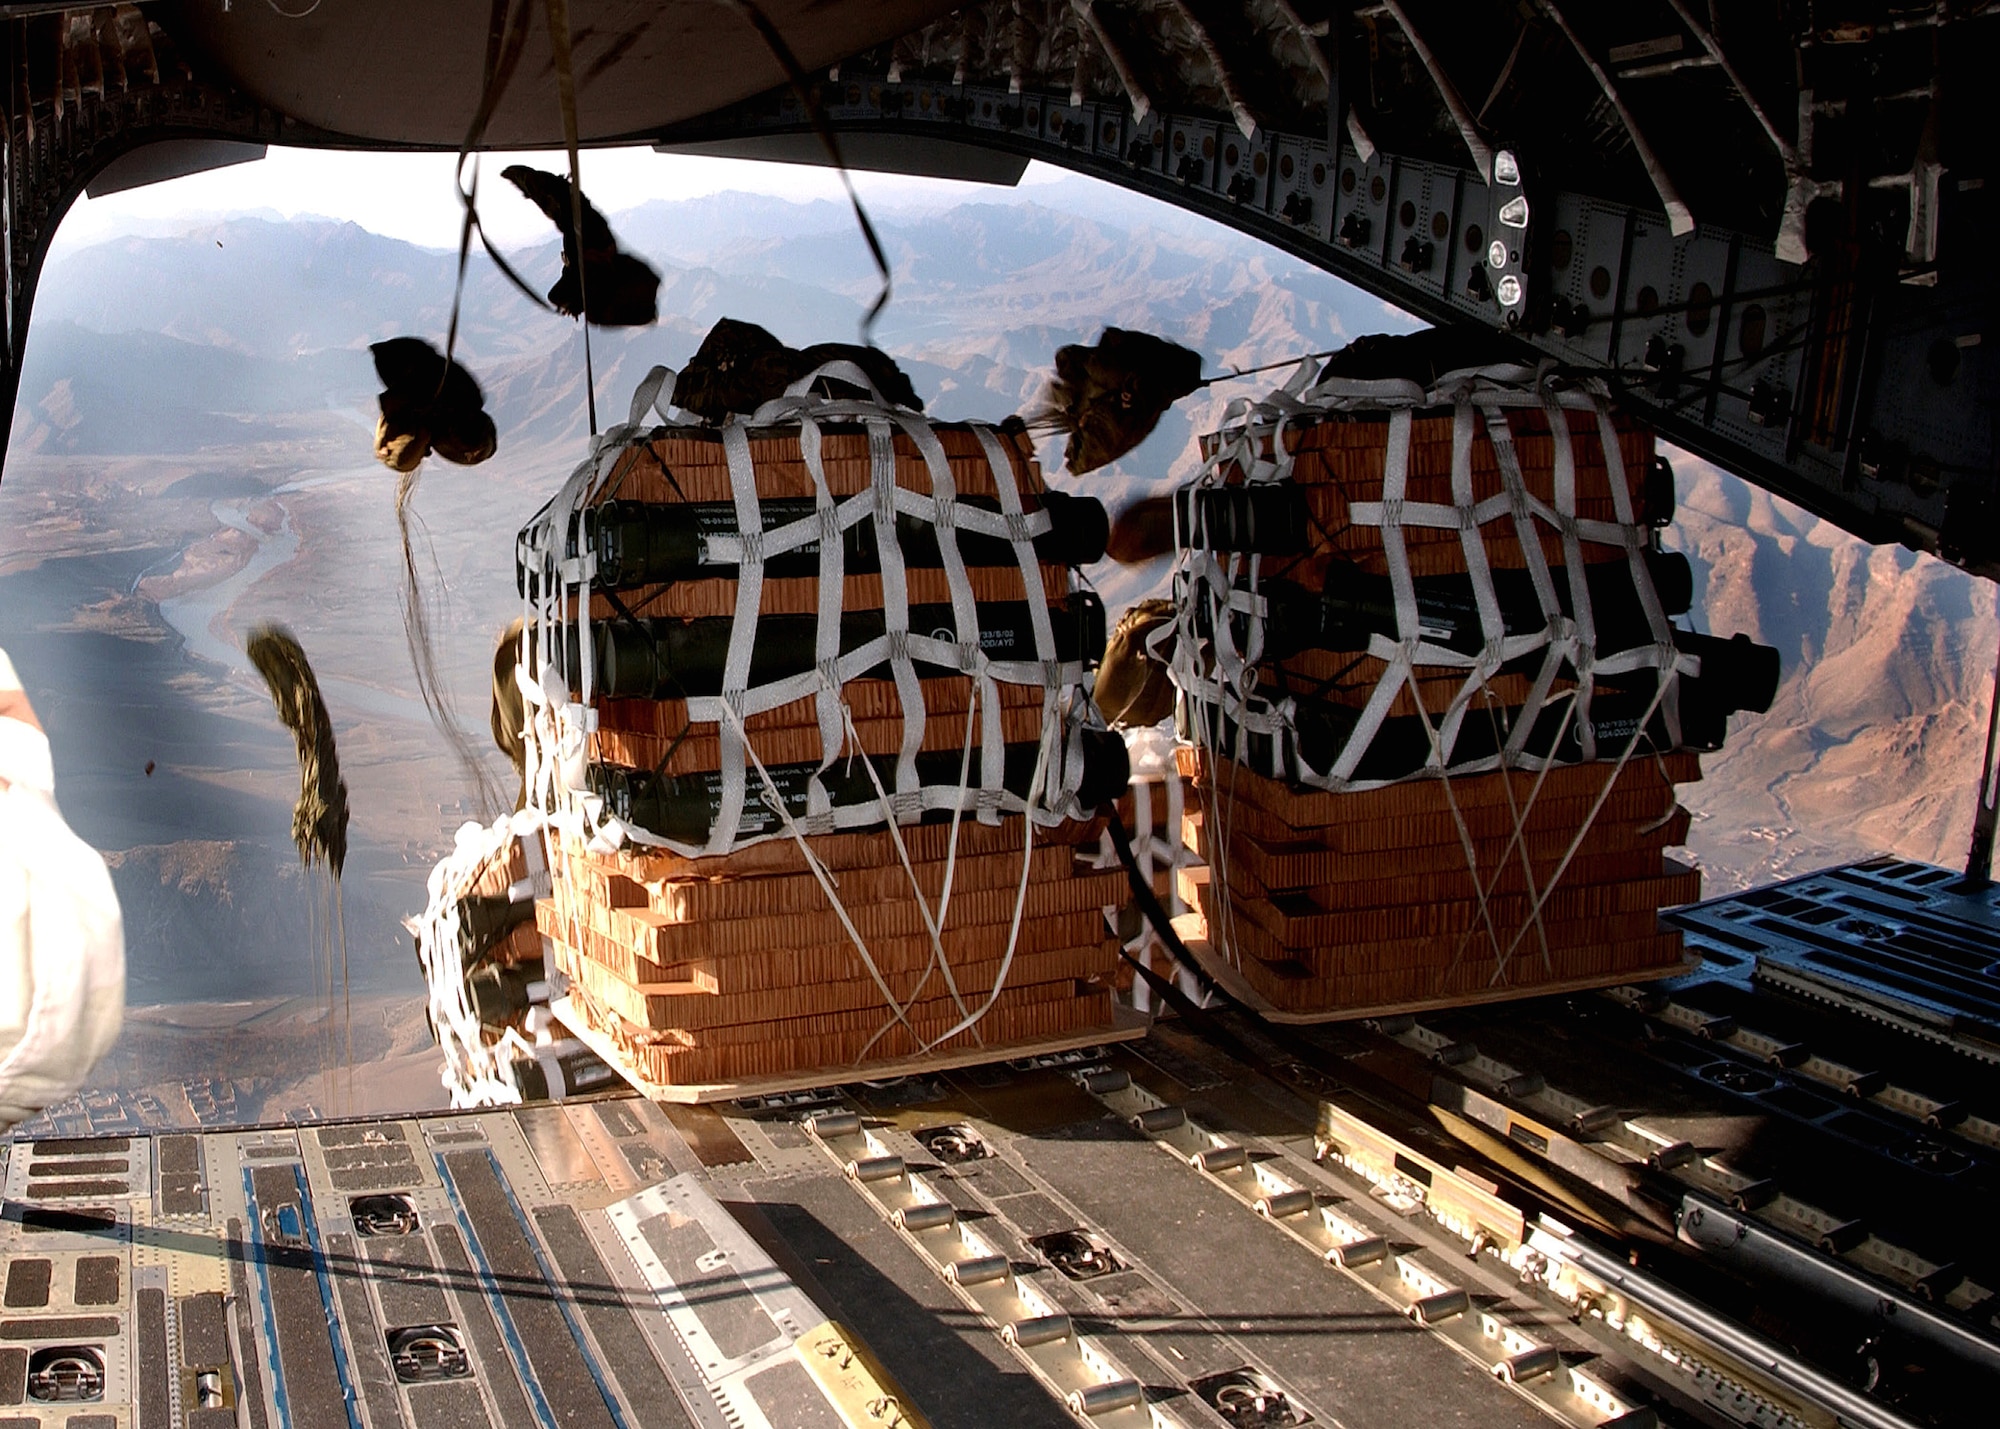 Parachutes begin to open on supply pallets being airdropped from a C-17 Globemaster III to servicemembers Jan. 2 at a remote camp in Afghanistan. The aircraft is from a desert air base in Southwest Asia. (U.S. Air Force photo/Senior Airman Ricky J. Best)